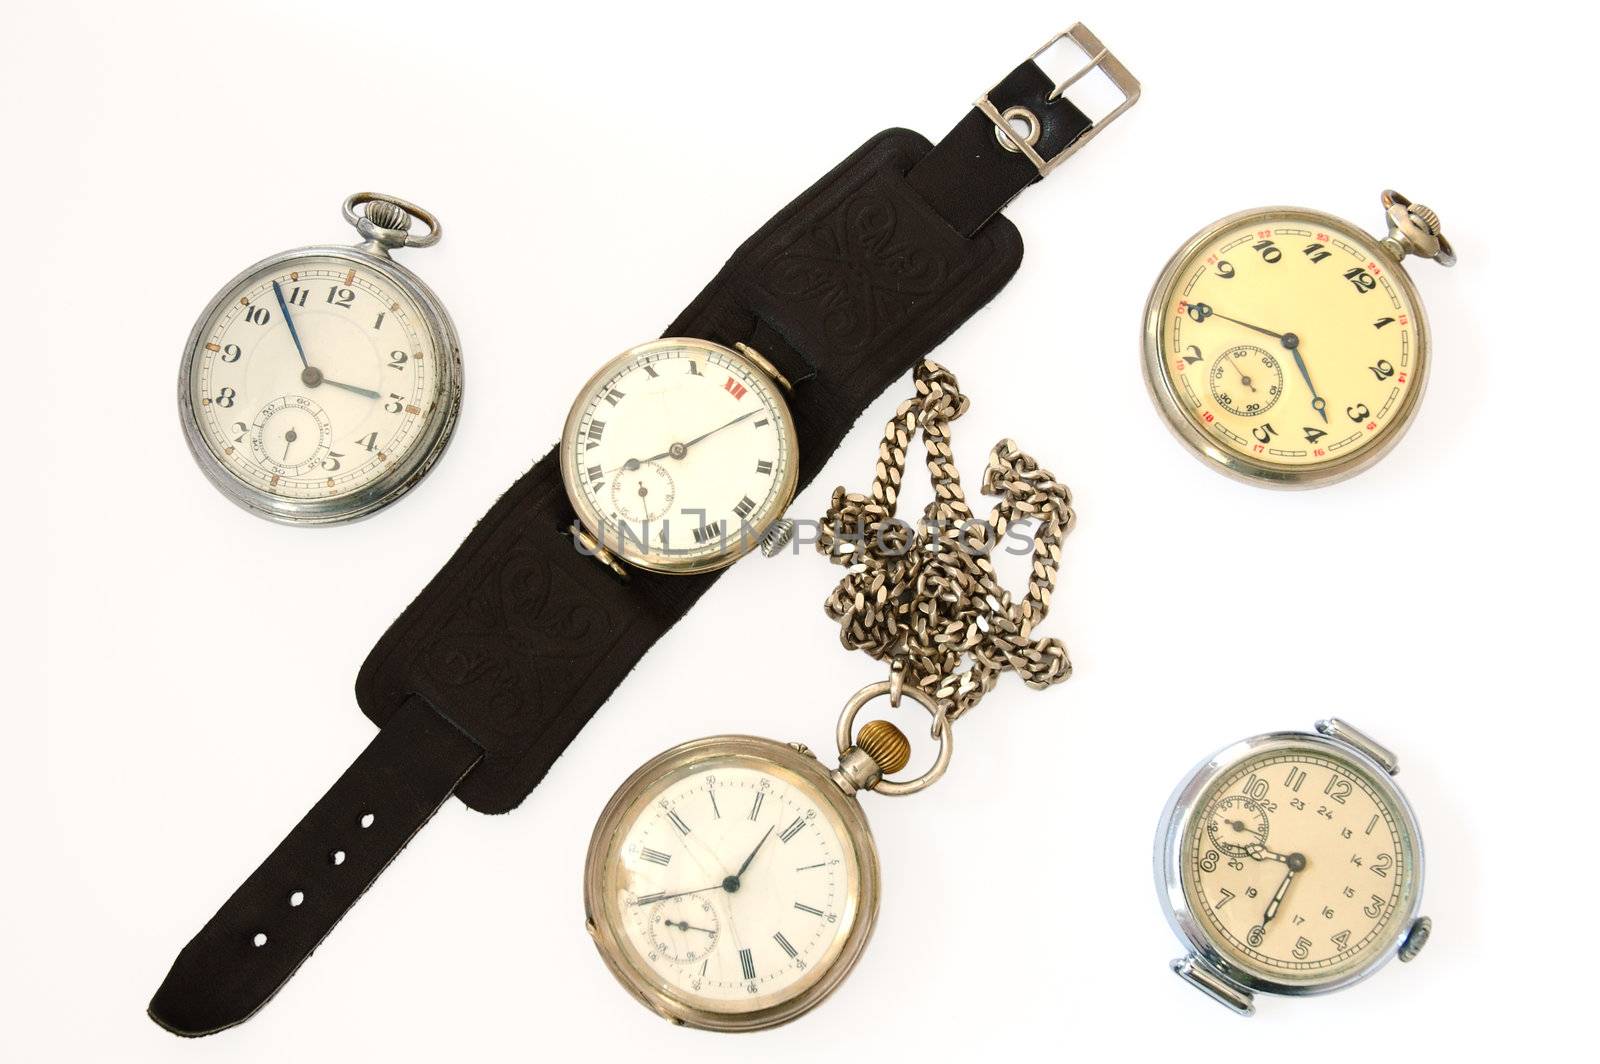 Many different old watches on overwhite background.